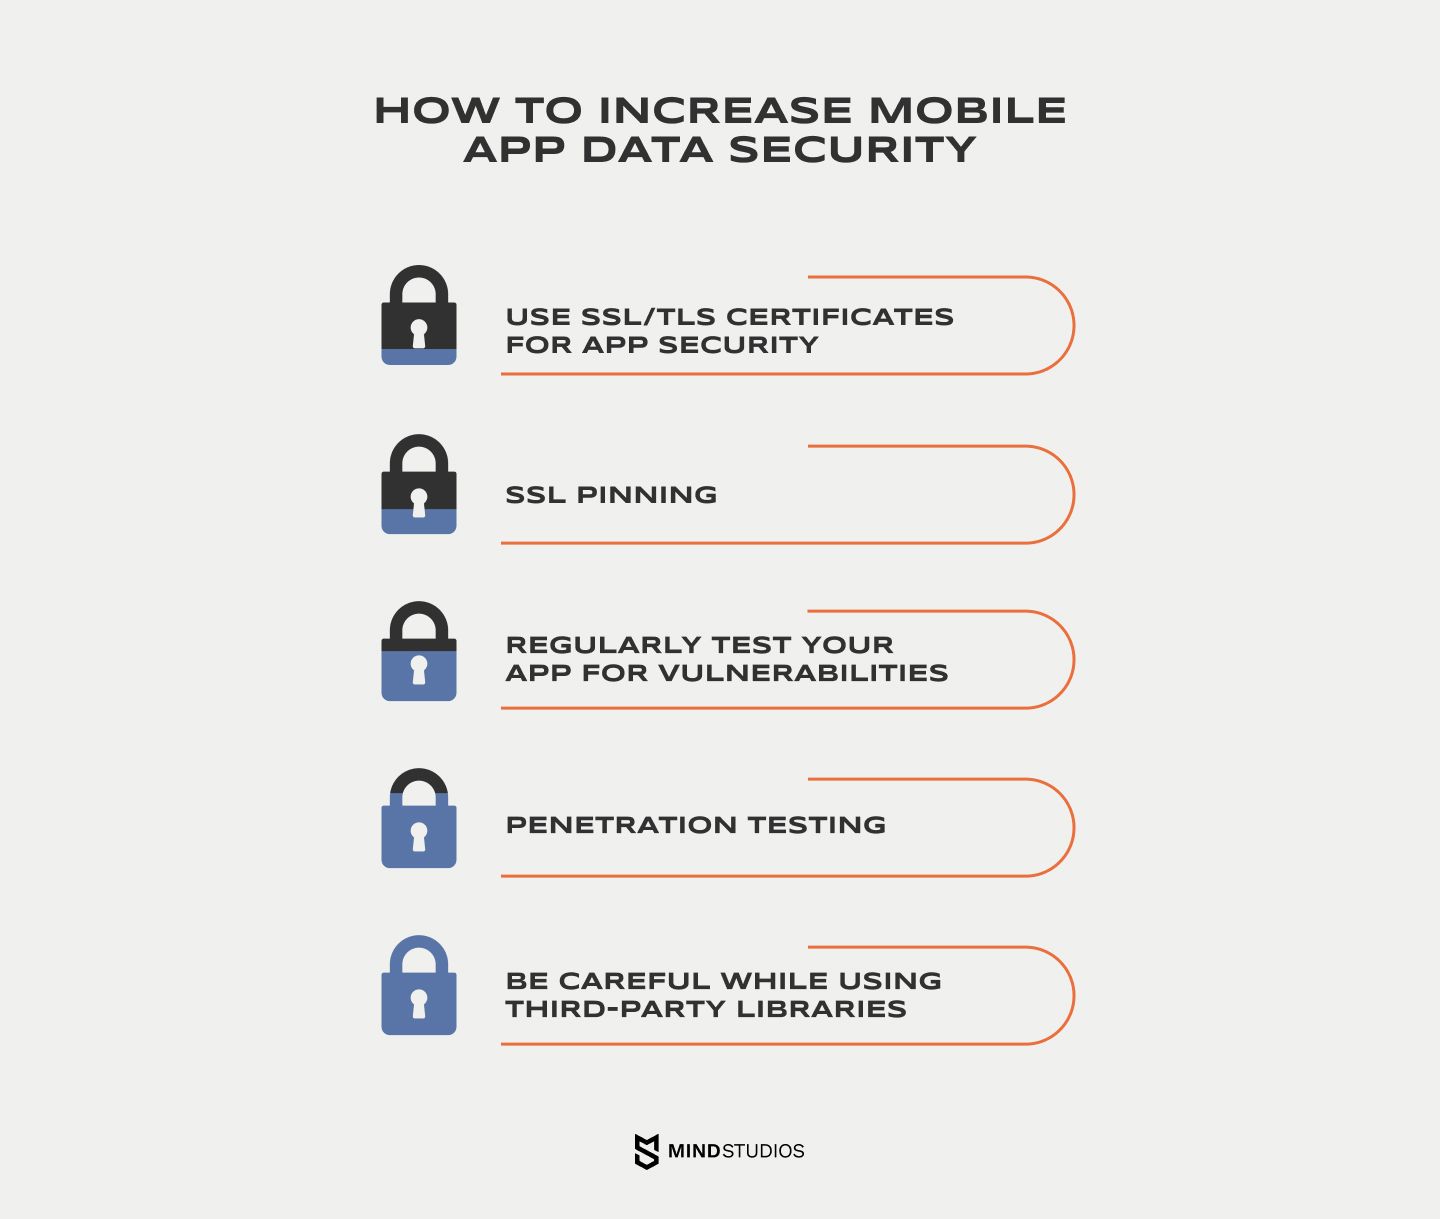 How to increase mobile app data security